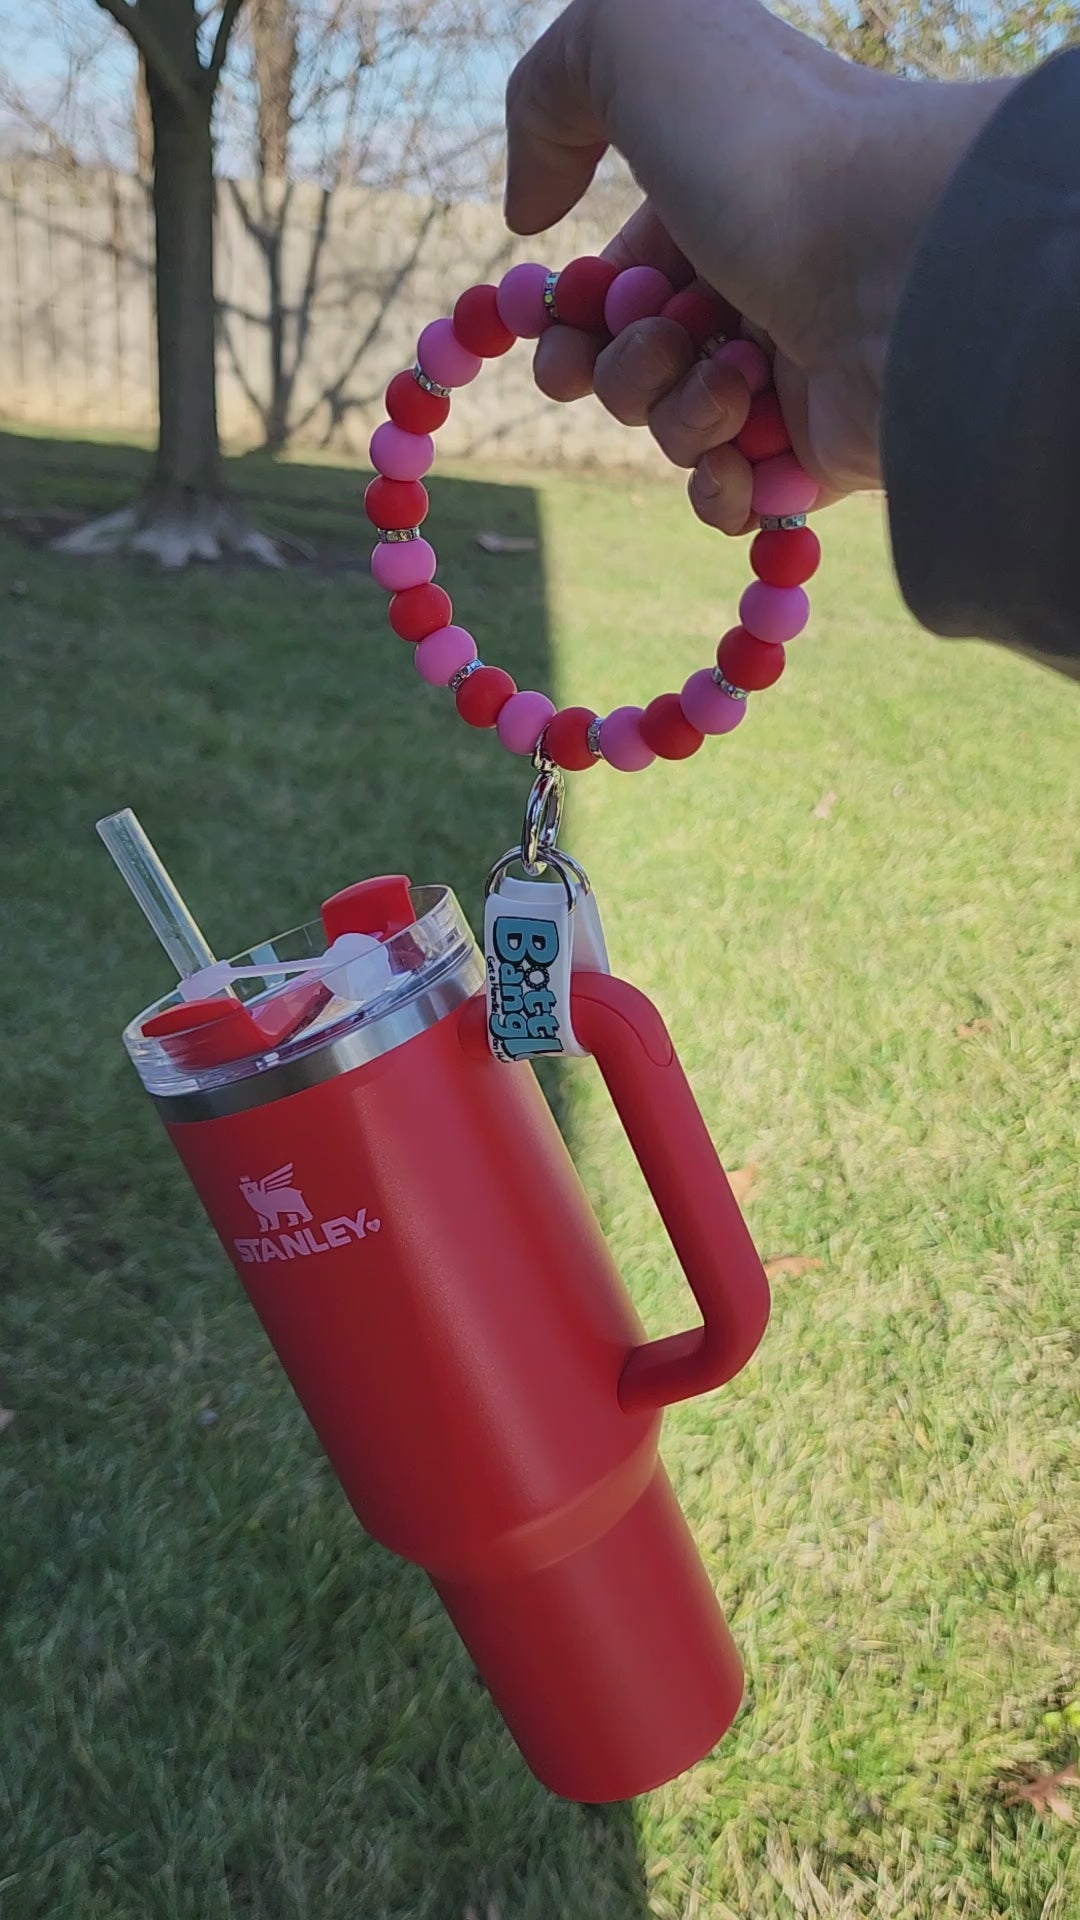 Load video: Red 40 oz Tumbler full of water and ice with a Red and Pink Bottle Bangle attached to the handle. Bottle Bangle is being bouced and shaken vigorously to demonstrate the weight bearing ability of the Bottle Bangle.